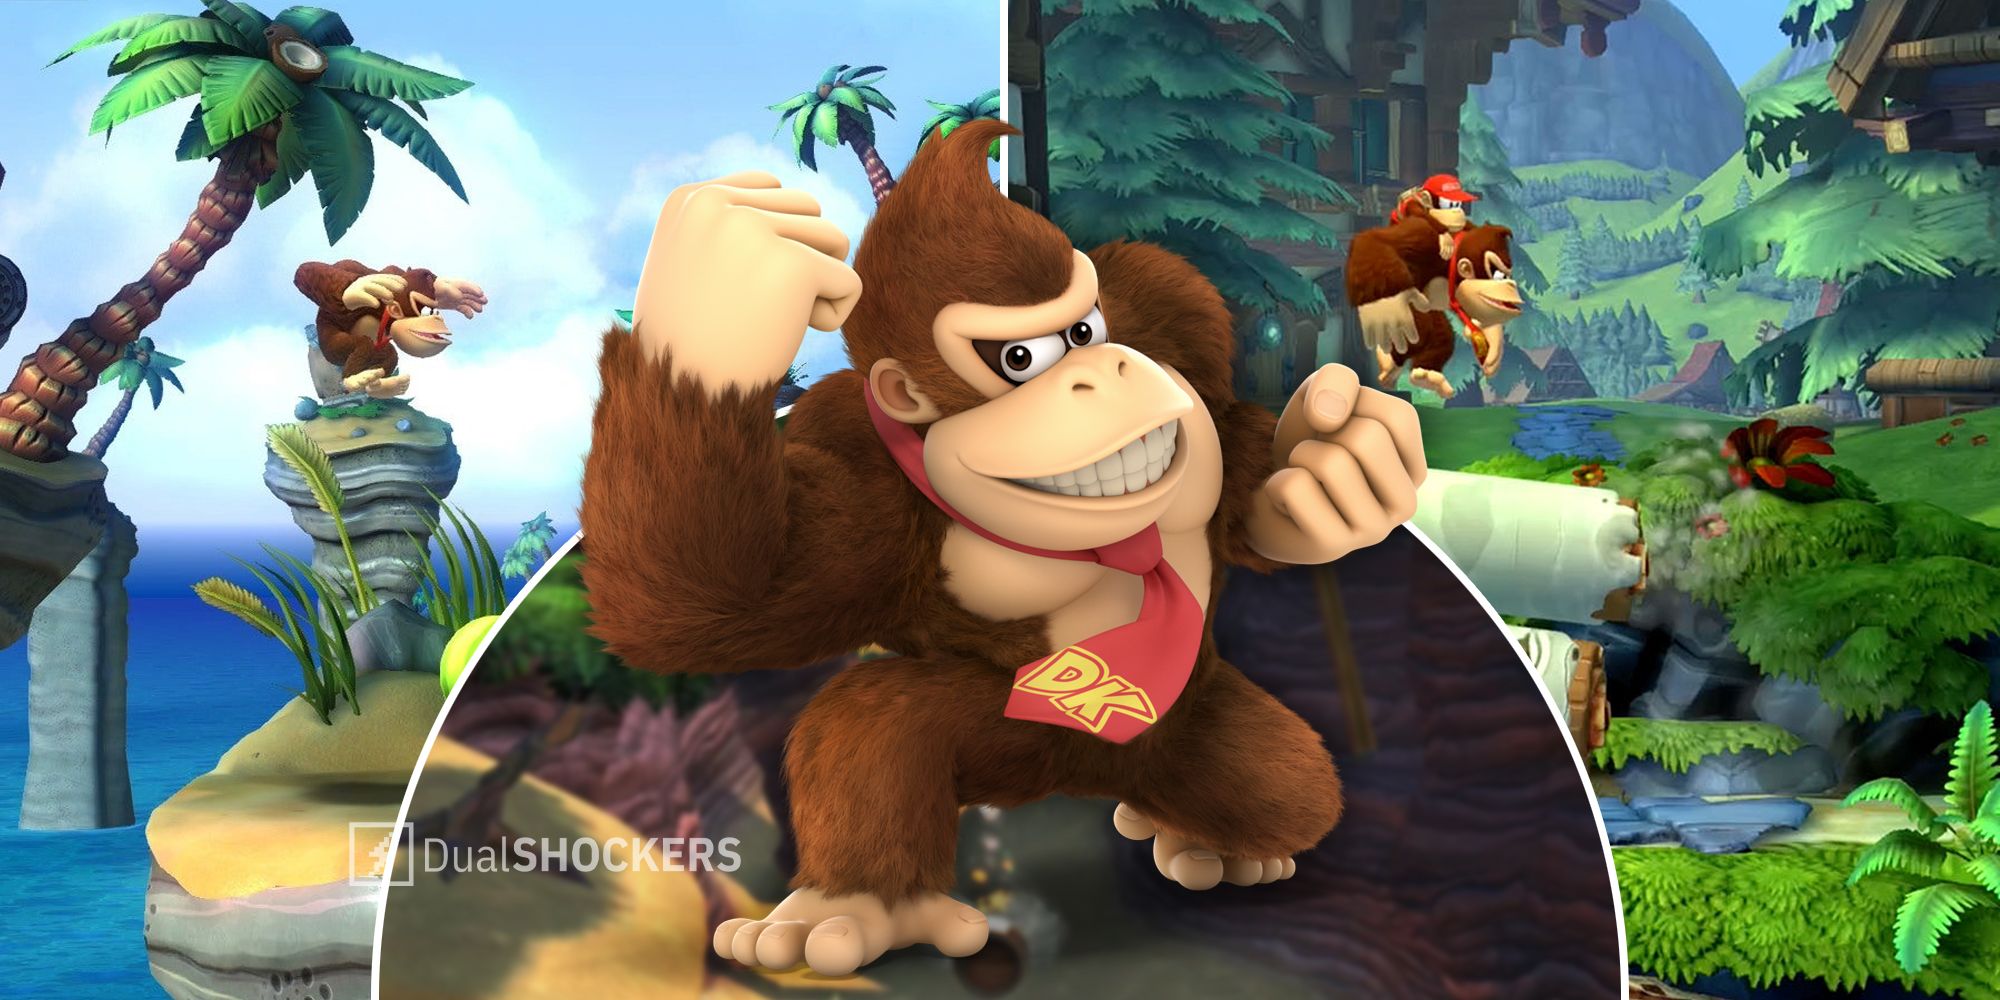 3D Donkey Kong Game Reportedly In Development At Nintendo